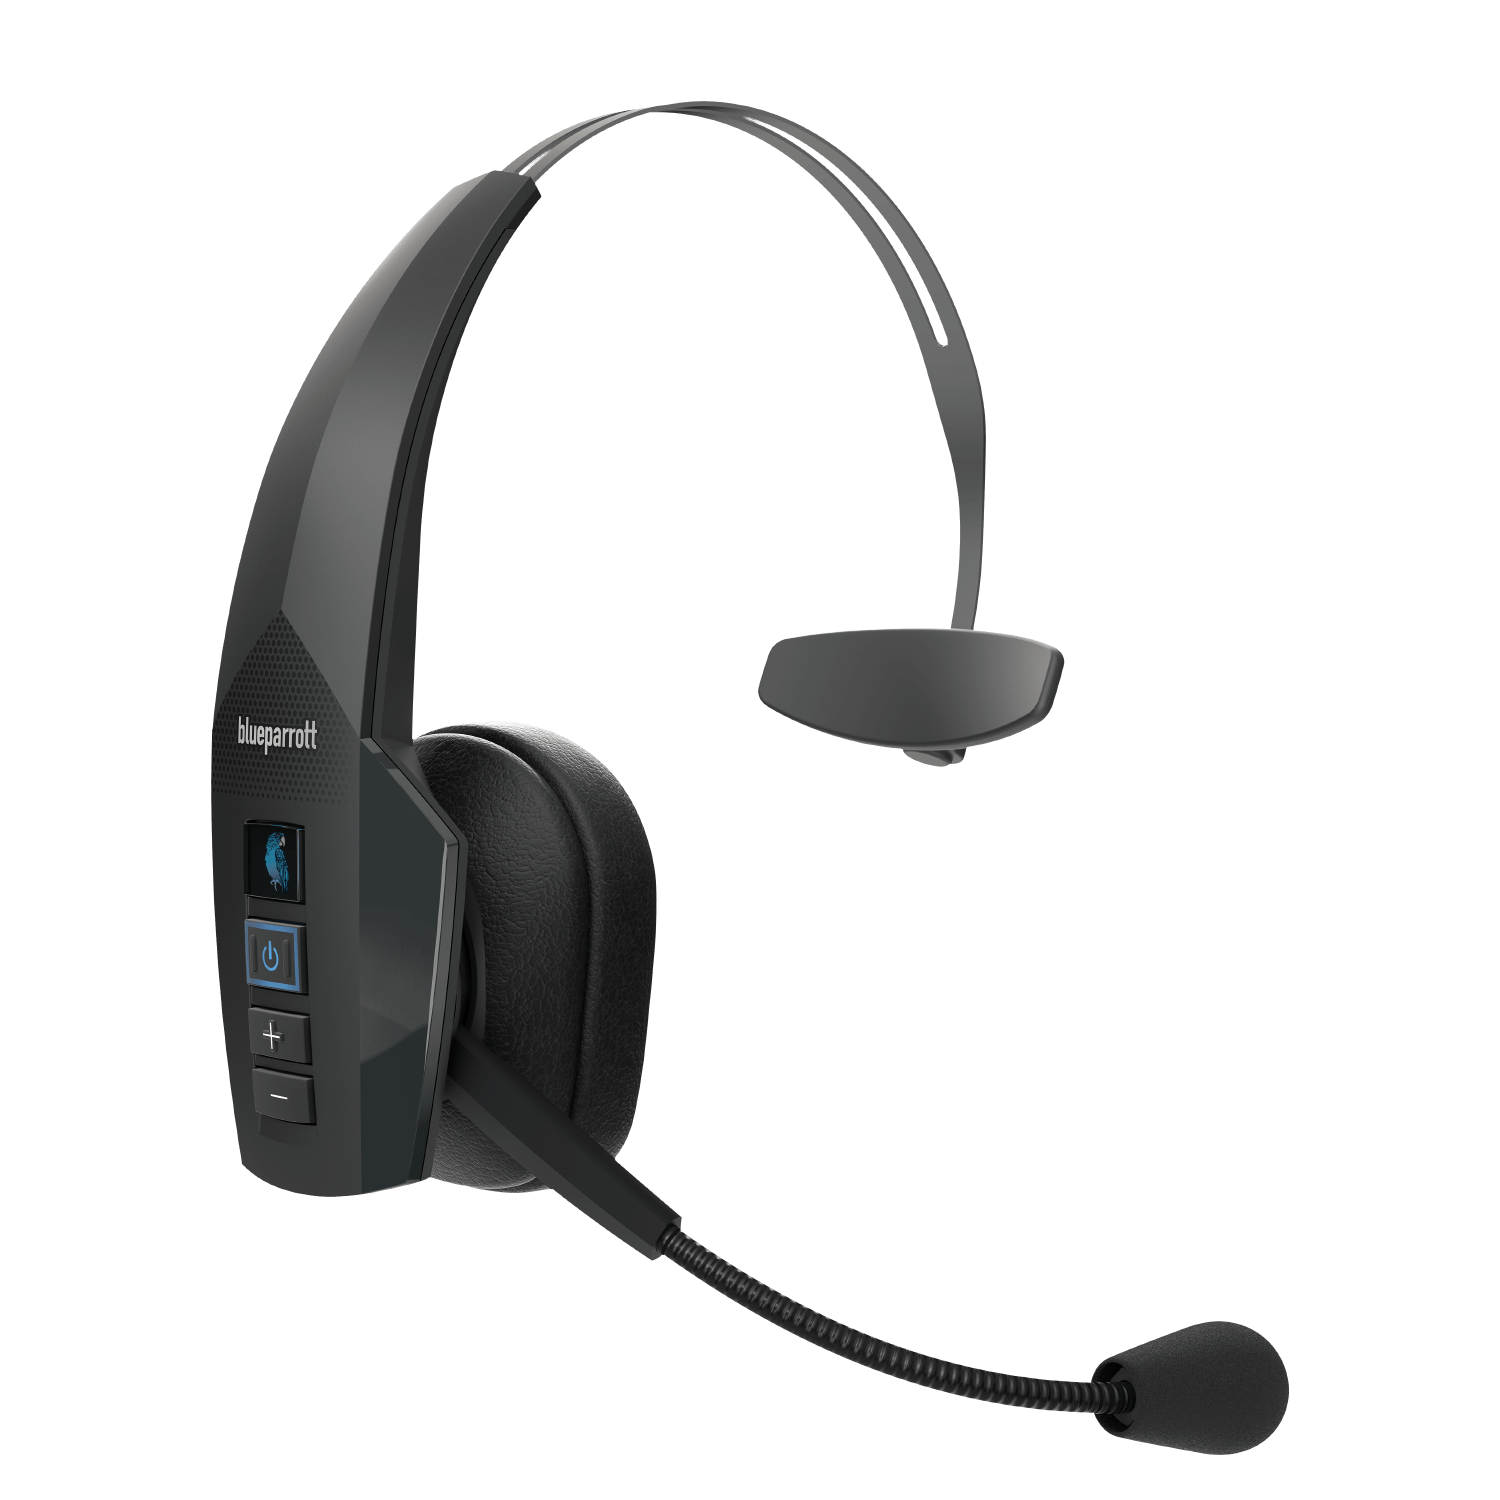 IP54-Rated Protection and Hands-Free Headset with Expanded Wireless Range BlueParrott B350-XT Noise Cancelling Bluetooth Headset Renewed Industry Leading Sound and Comfort 